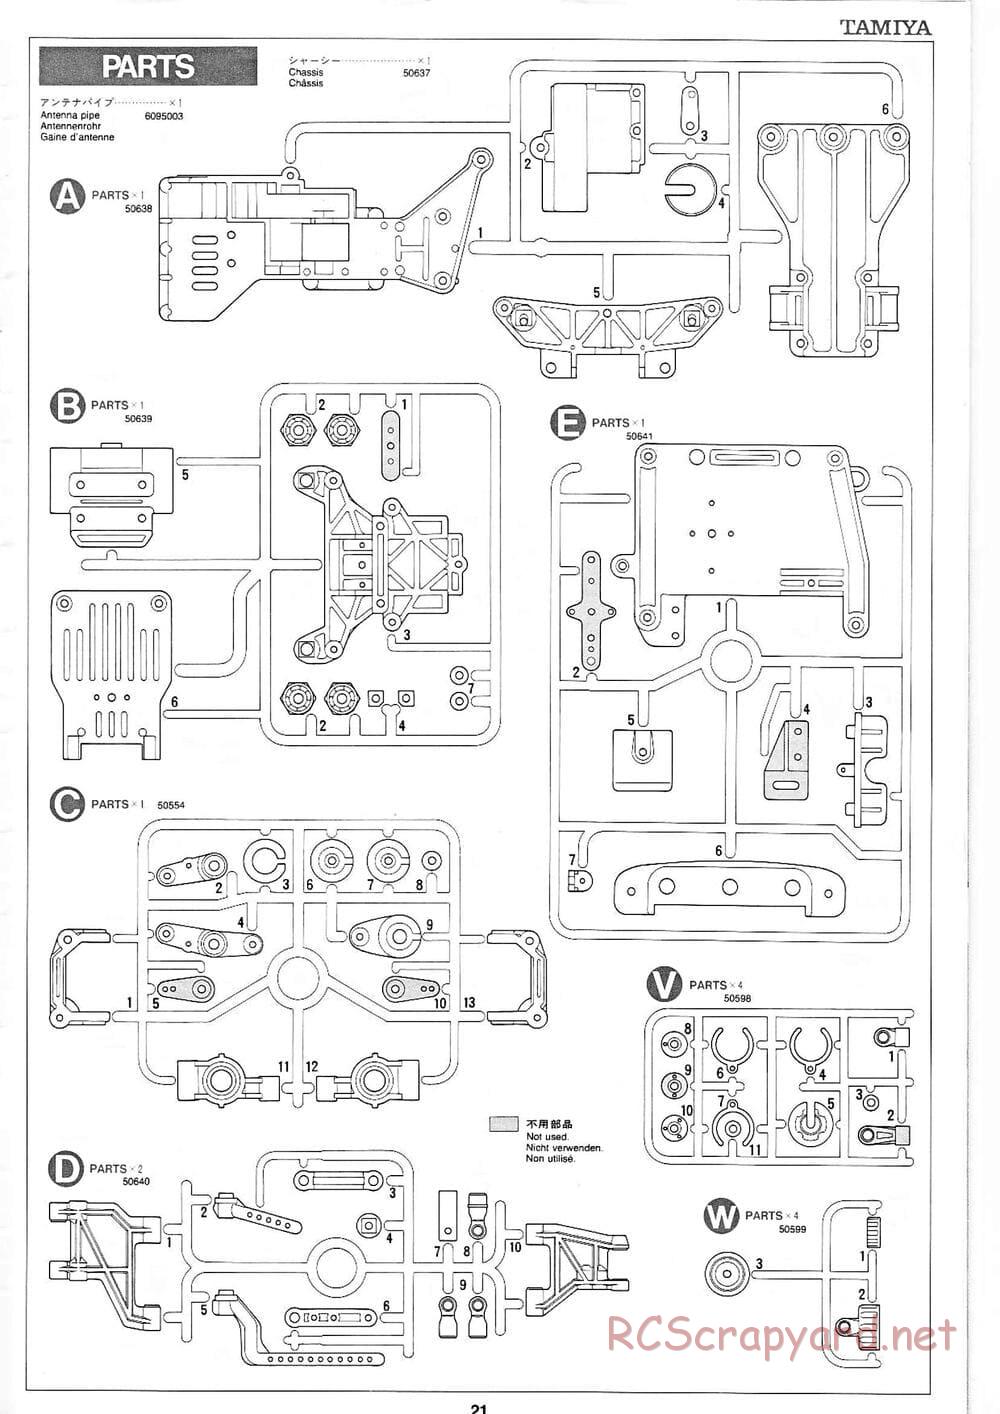 Tamiya - Volkswagen New Beetle - FF-01 Chassis - Manual - Page 17